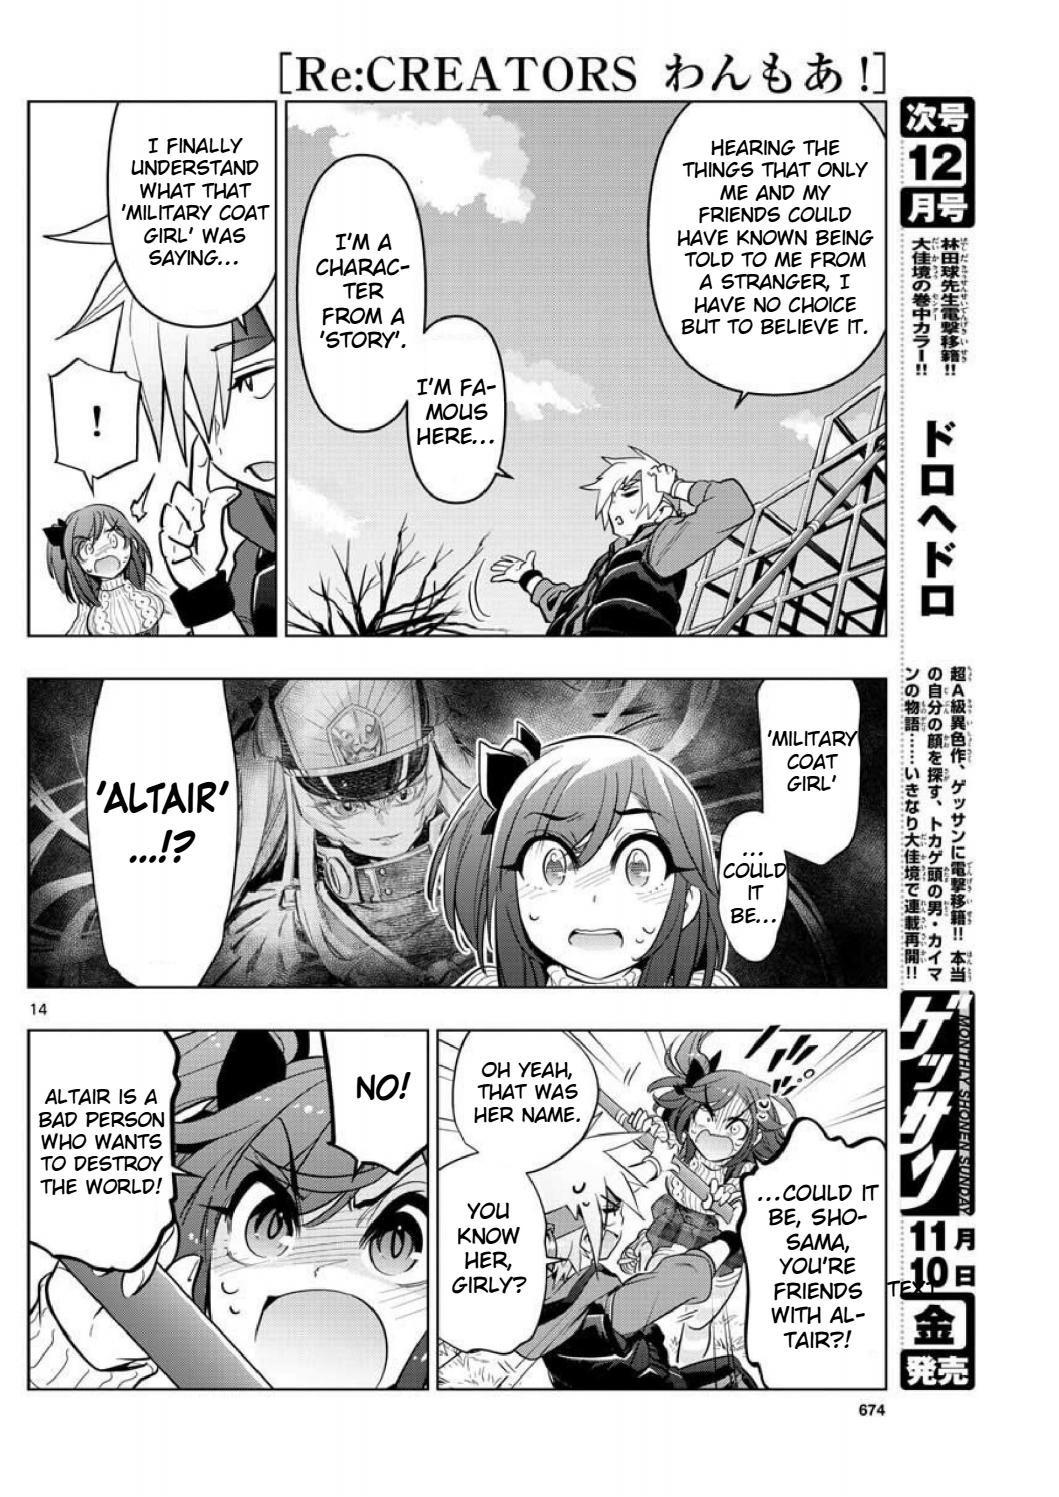 Re:creators One More Chapter 5 #12